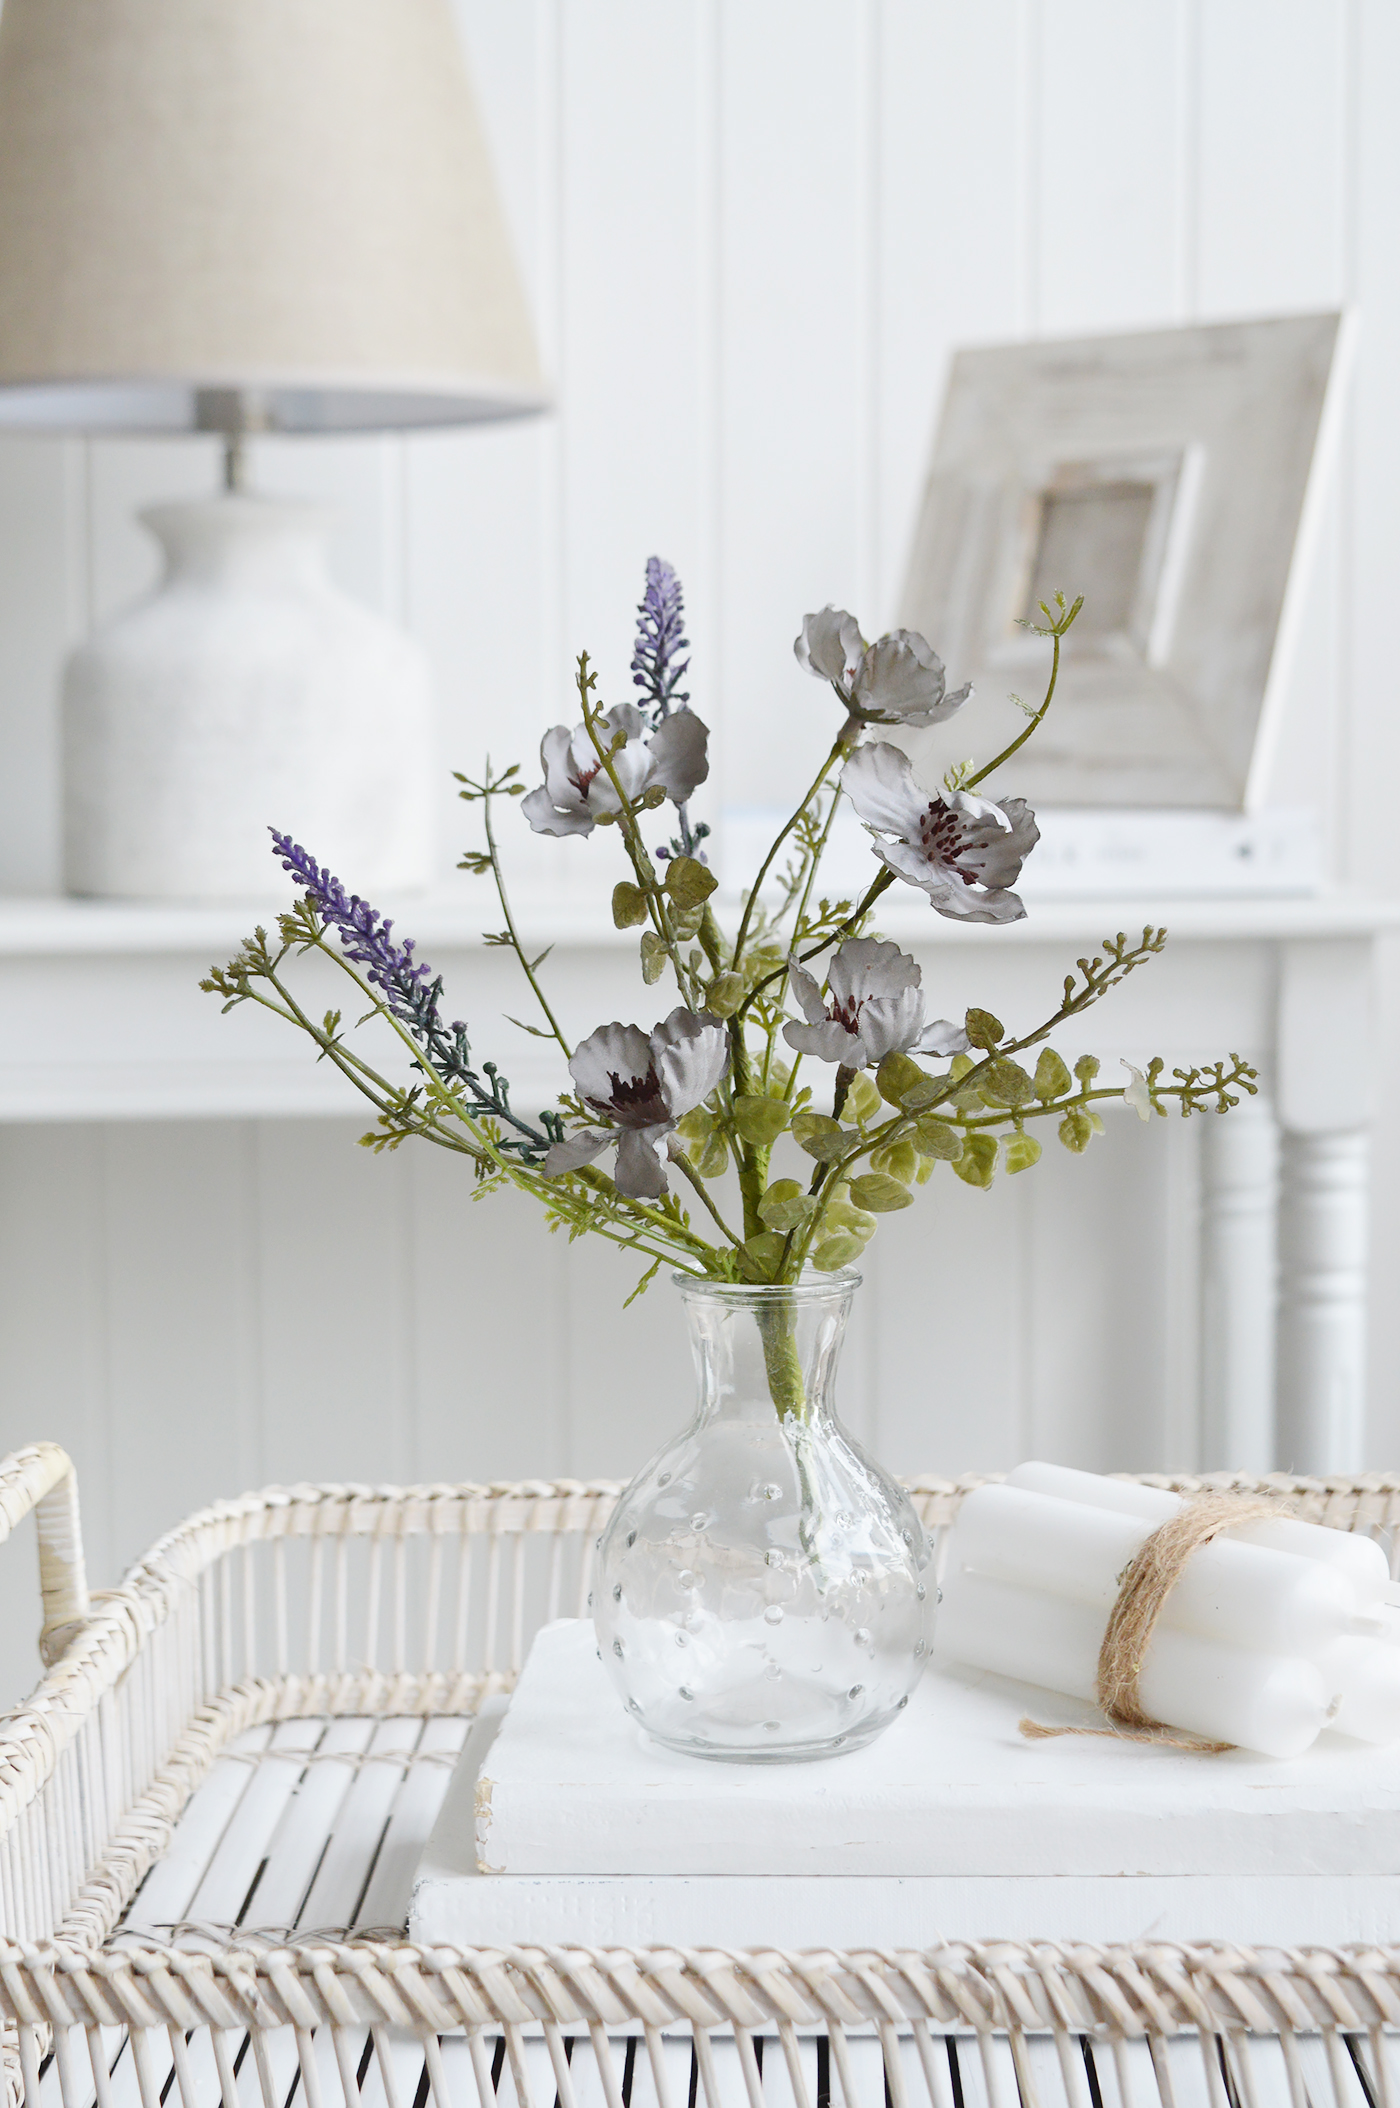 White Furniture and accessories for the home. Faux flowers and greenery - Little Blue Wild Rose spray for styling New England style  interiors. Farmhouse, country, coastal and city homes